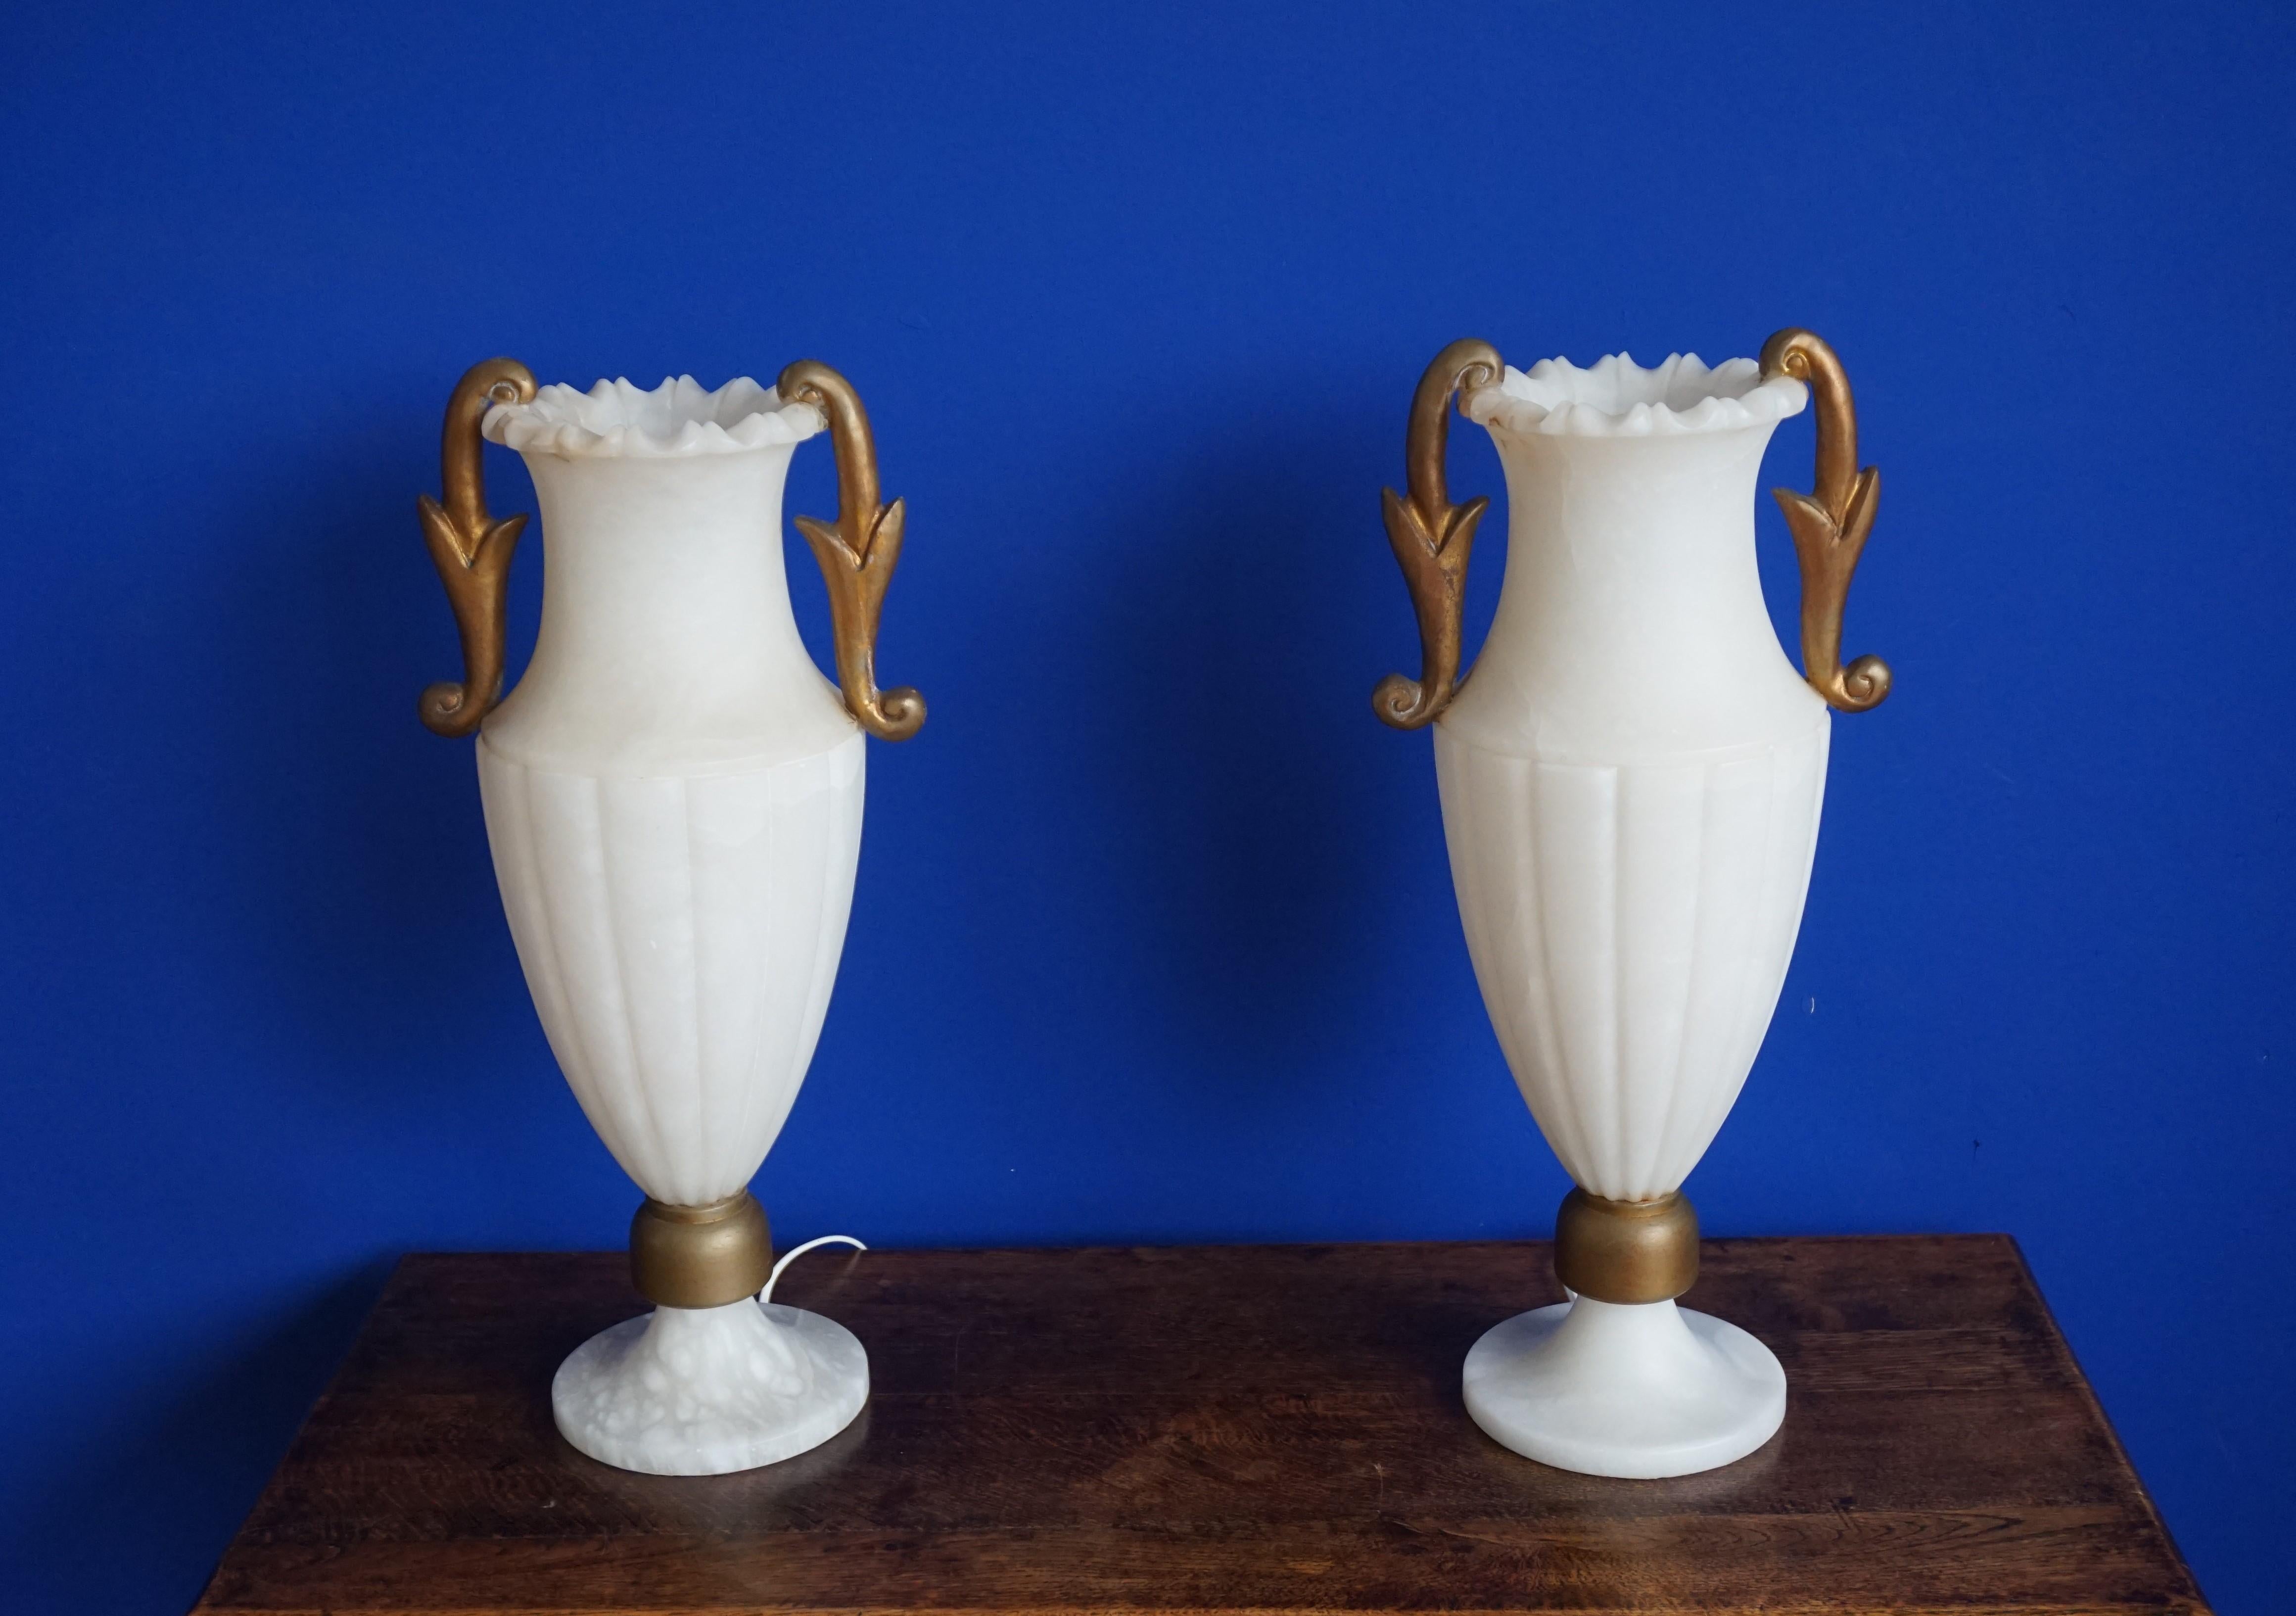 Midcentury era and large size pair of alabaster table lights.

This large and incredibly rare pair of Hollywood Regency table lamps could not be in better condition. All hand carved out of pure white alabaster rocks these two-piece table lamps are